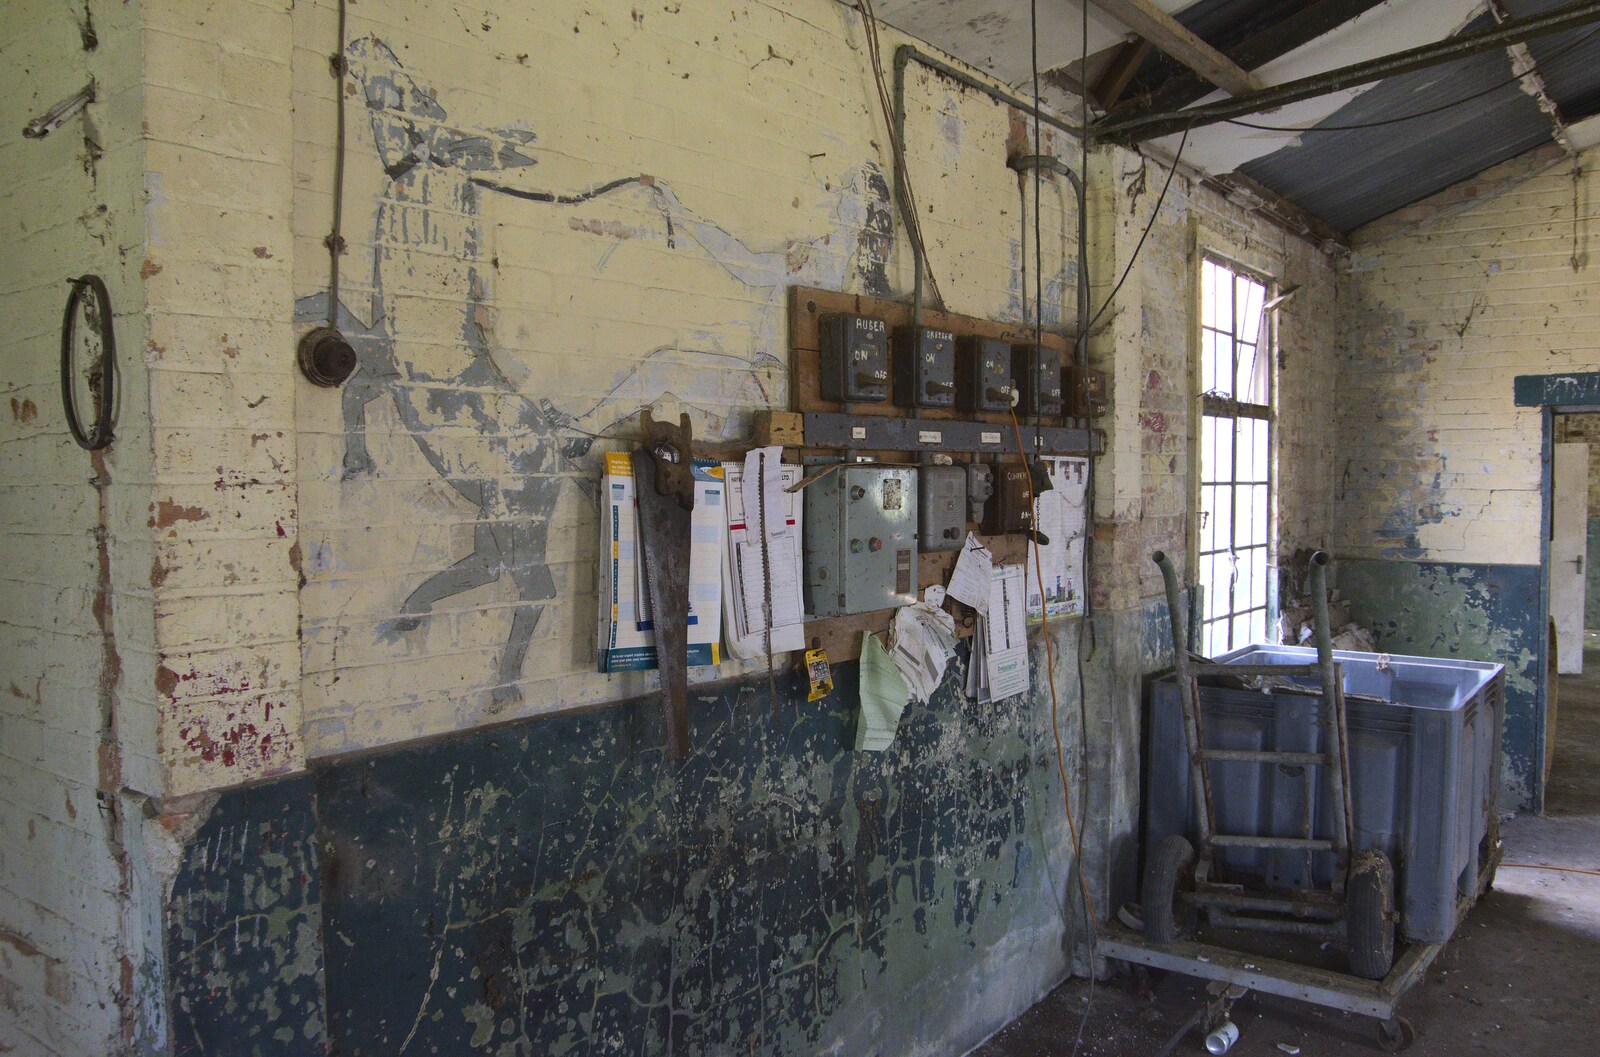 More wall art, obscured by some electrical gear from A 1940s Timewarp, Site 4, Bungay Airfield, Flixton, Suffolk - 9th June 2022